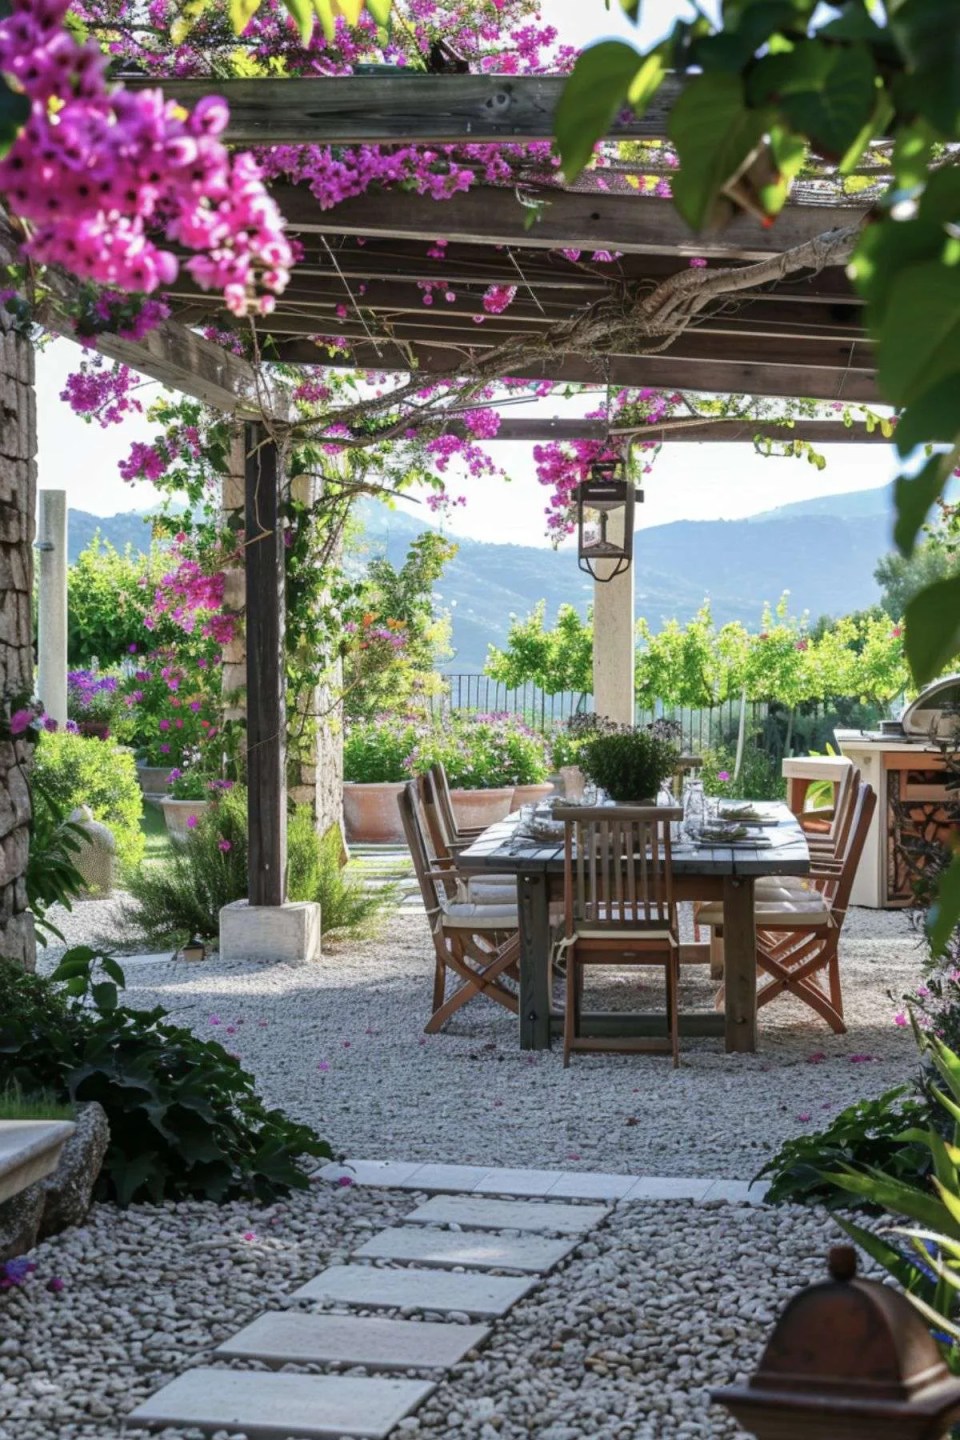 a garden dining table and chair set under a pergola in a mediterranean garden. There is bougainvillea growing up the pergola with olive trees in the background